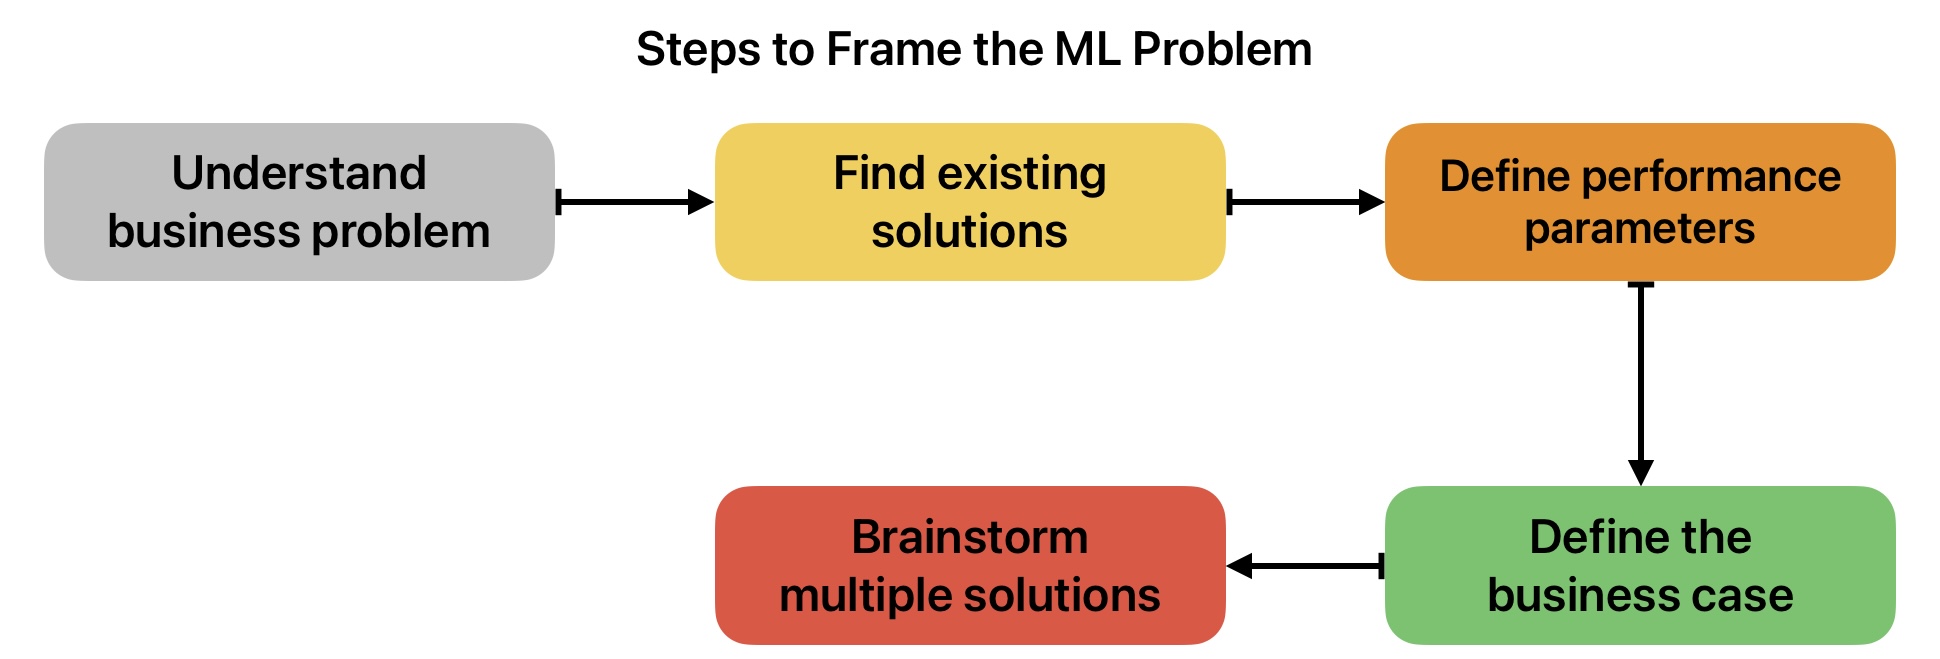 This image shows Activities to convert business problems into ML Problem